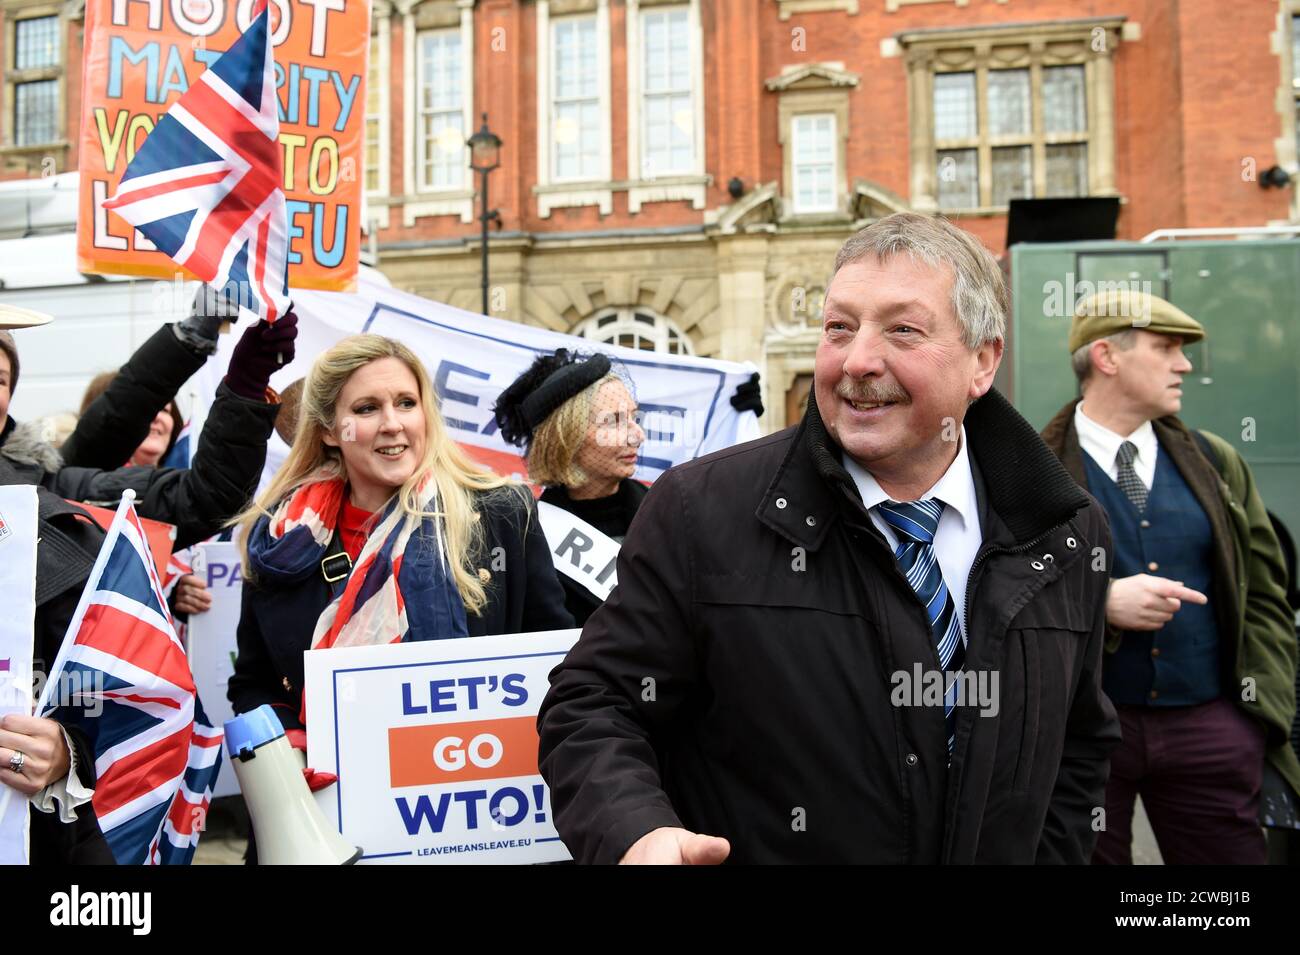 Photograph of Sammy Wilson. Samuel Wilson (1953-) a Democratic Unionist Party politician from Northern Ireland who has been the Member of Parliament for East Antrim since 2005. He served as a Member of the Legislative Assembly for Belfast East from 1998 to 2003 and for East Antrim from 2003 until 2015. Stock Photo